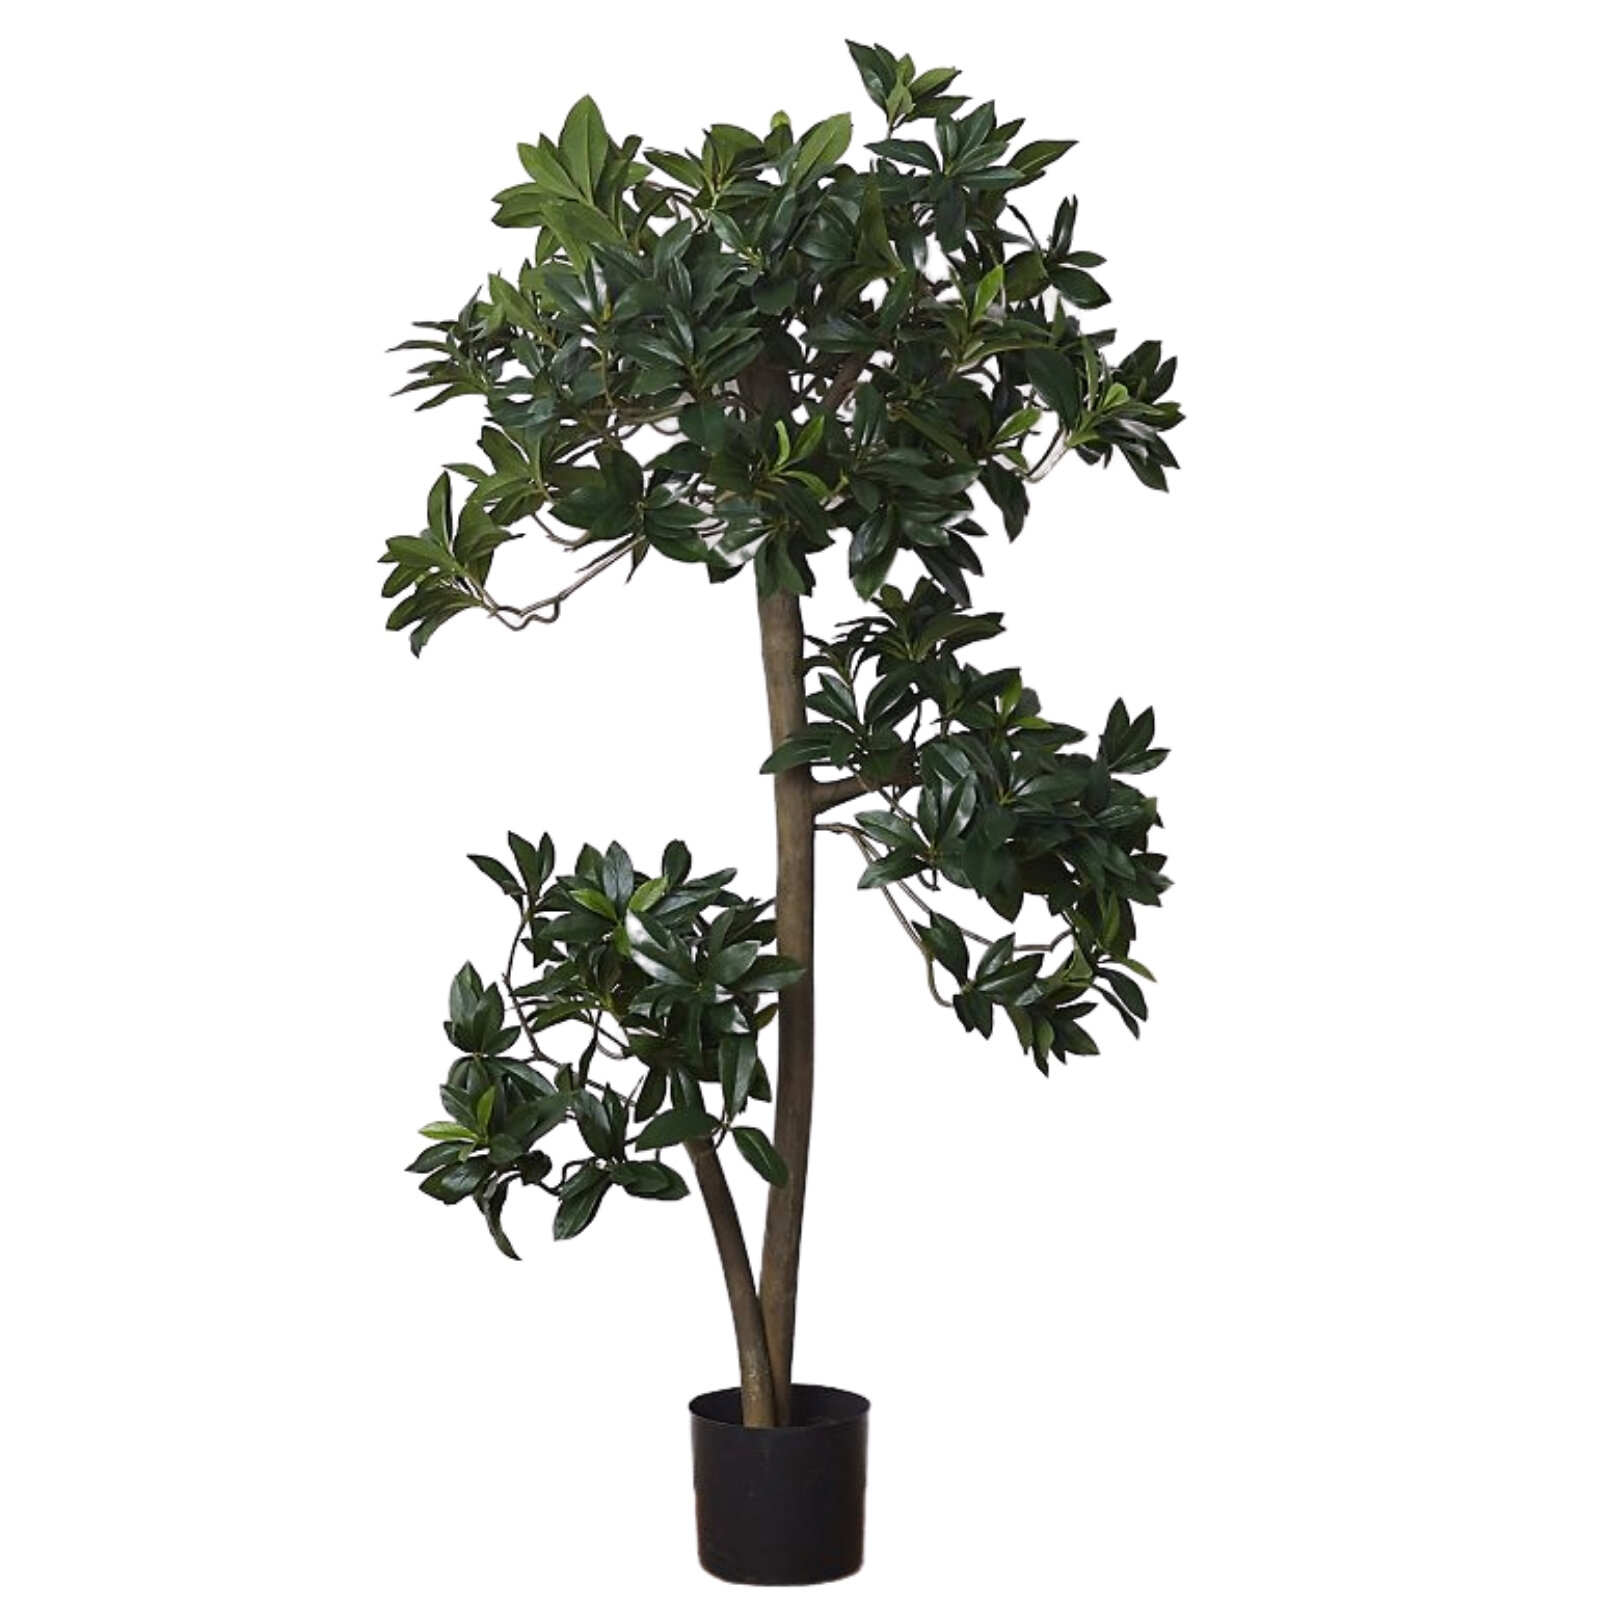 Faux Euonymus Japonicus Tree, Anthropologie, $298